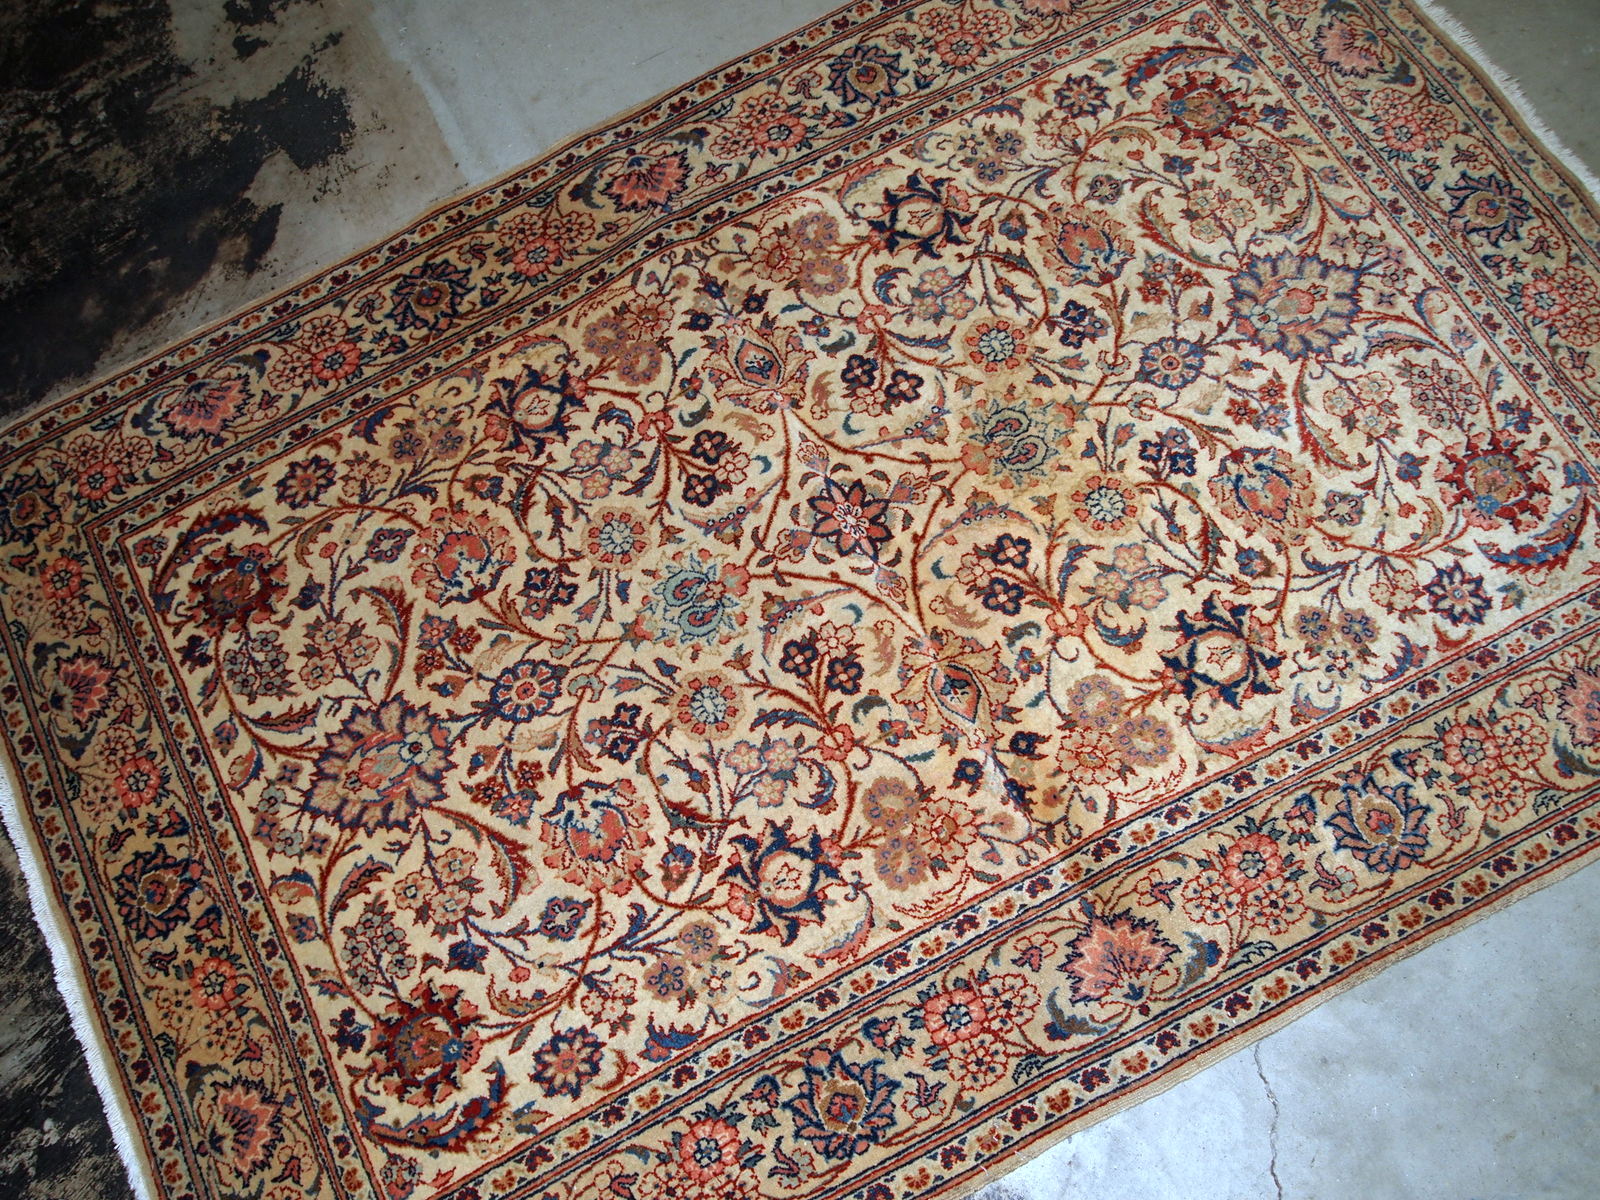 Handmade antique Kashan rug in light shade of beige. The rug is in original good condition from the beginning of 20th century.